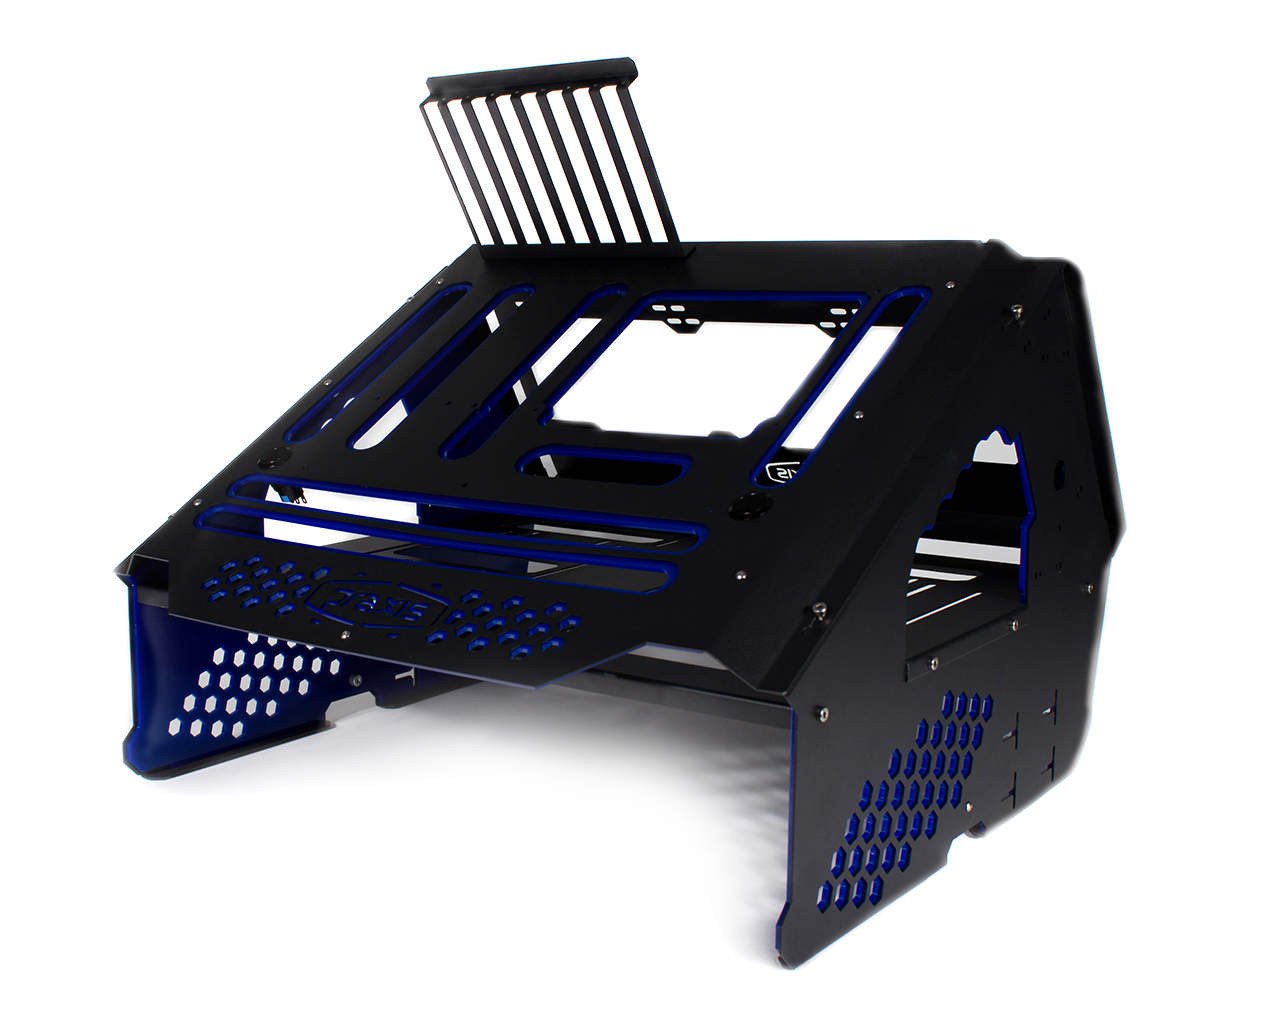 PrimoChill's Praxis Wetbench Powdercoated Steel Modular Open Air Computer Test Bench for Watercooling or Air Cooled Components - PrimoChill - KEEPING IT COOL Black w/Solid Blue Accents